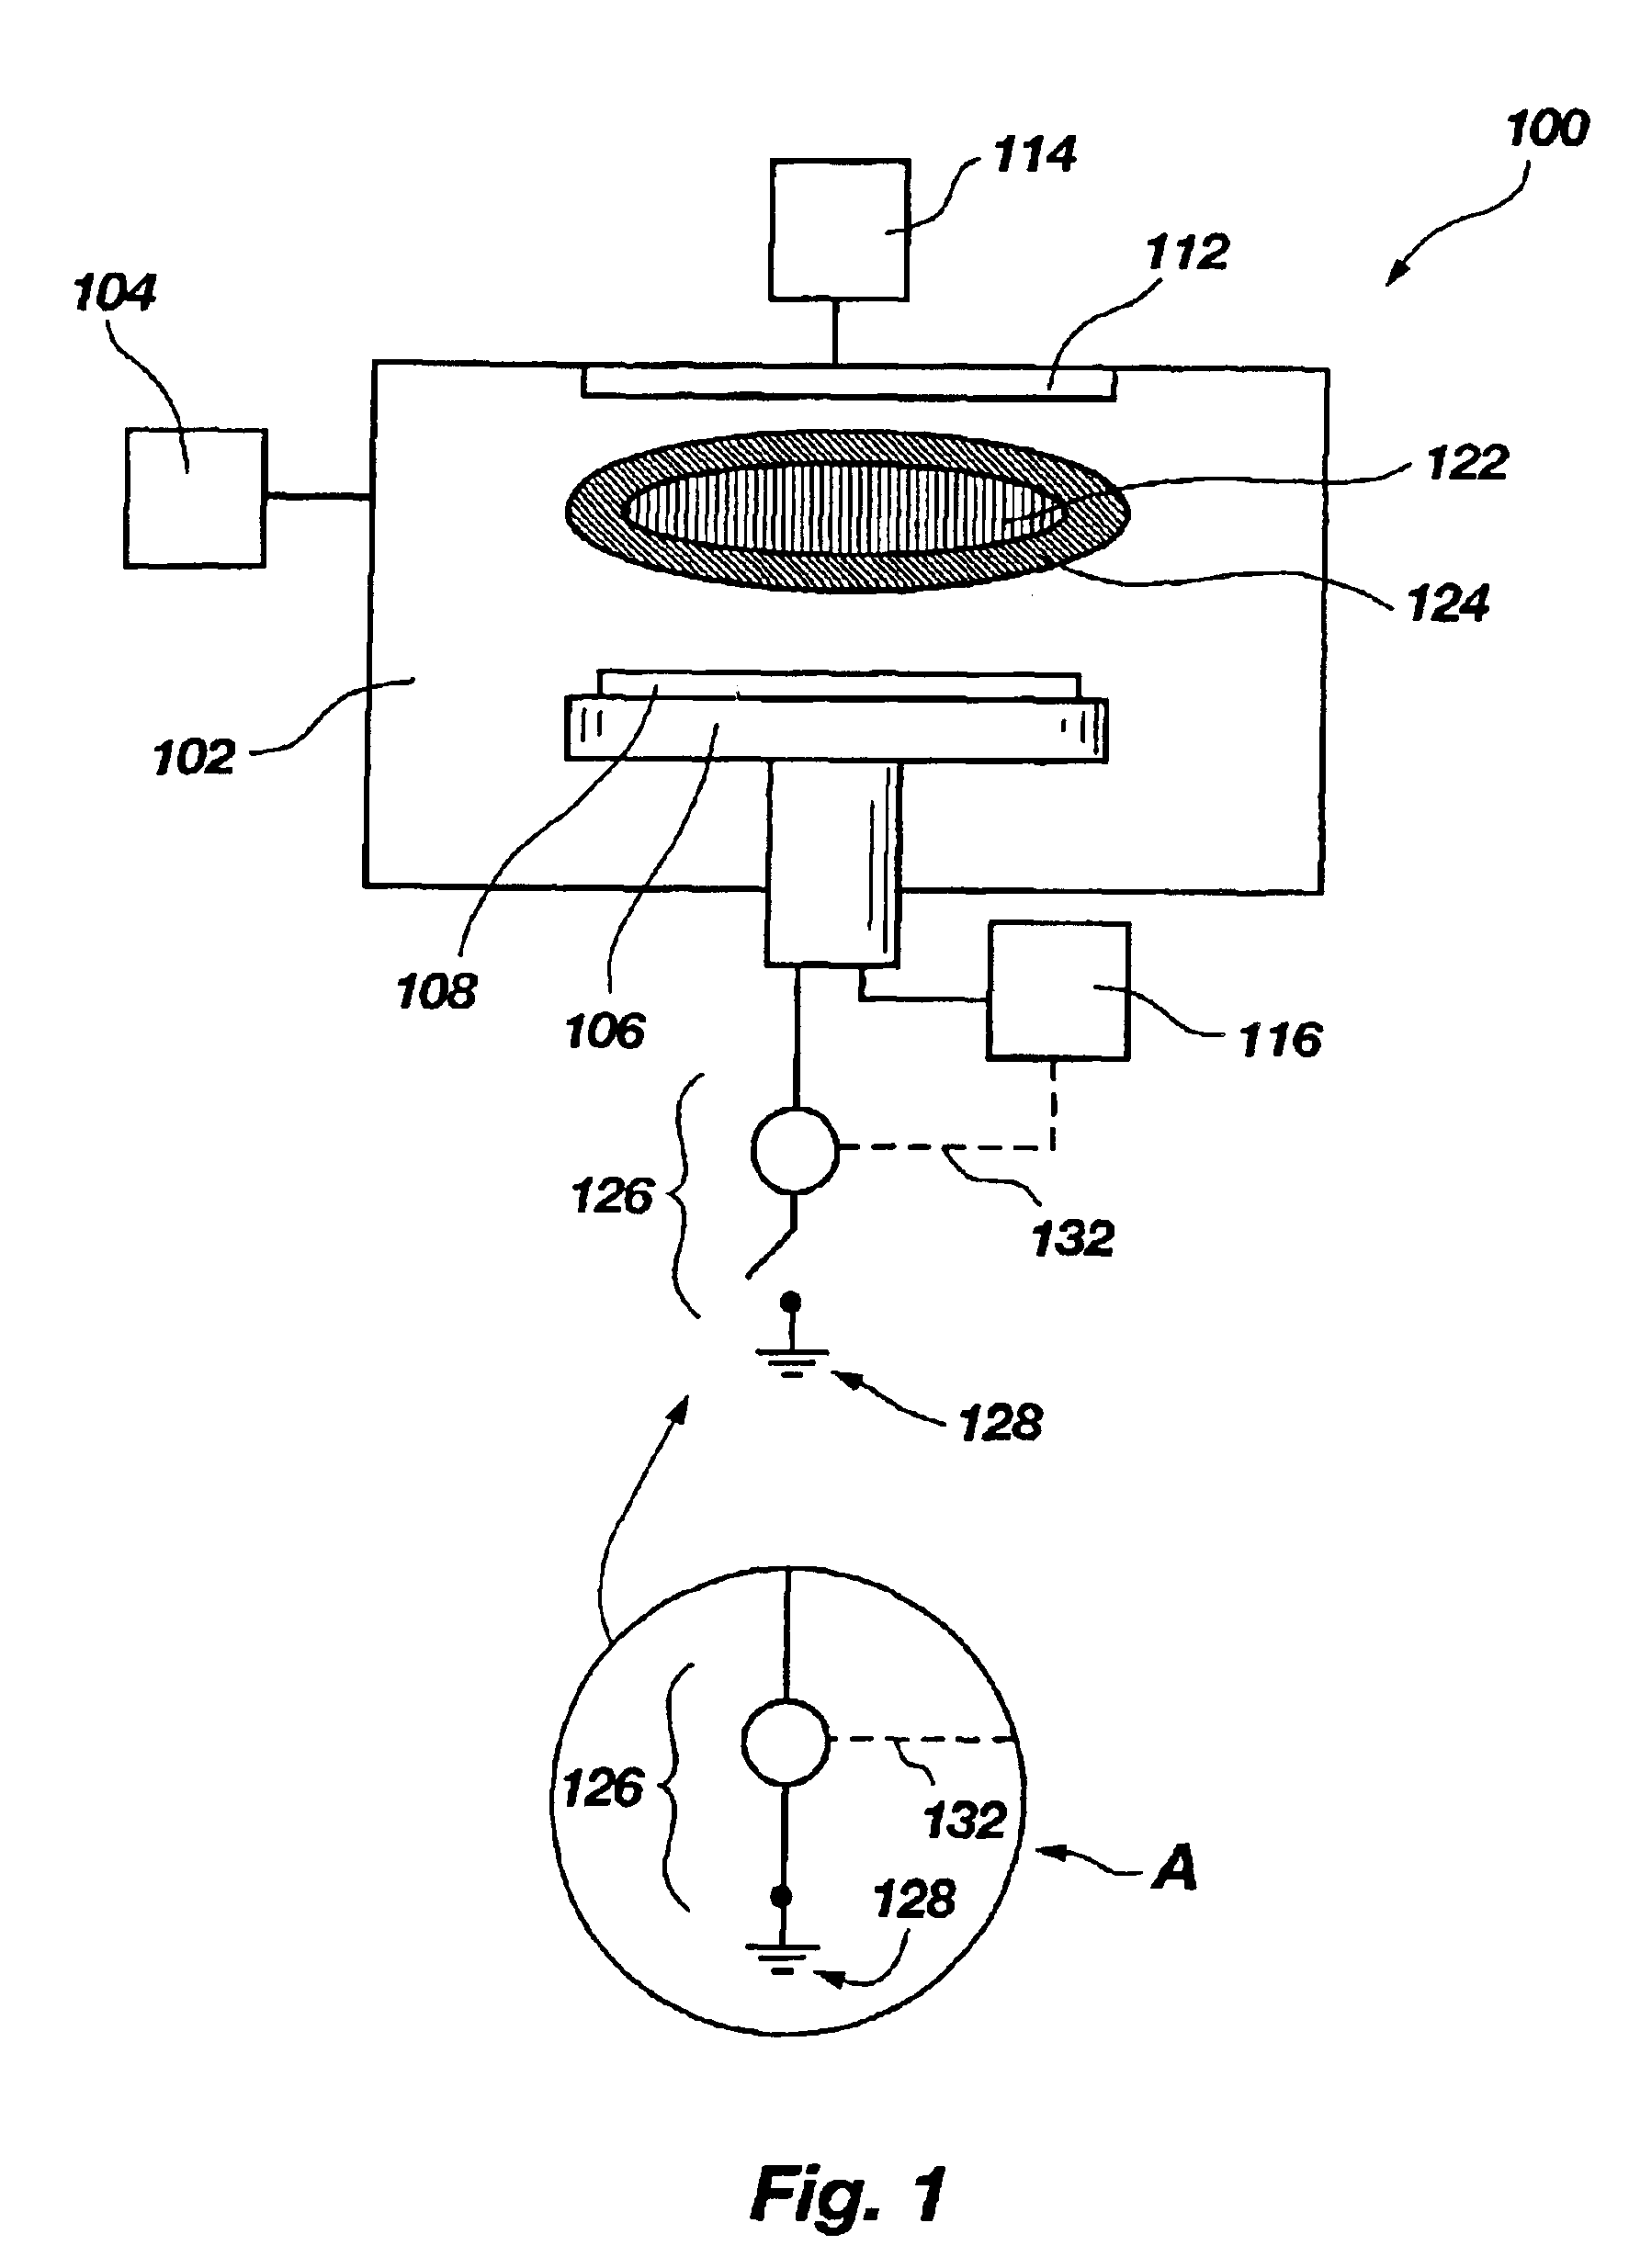 Use of pulsed grounding source in a plasma reactor